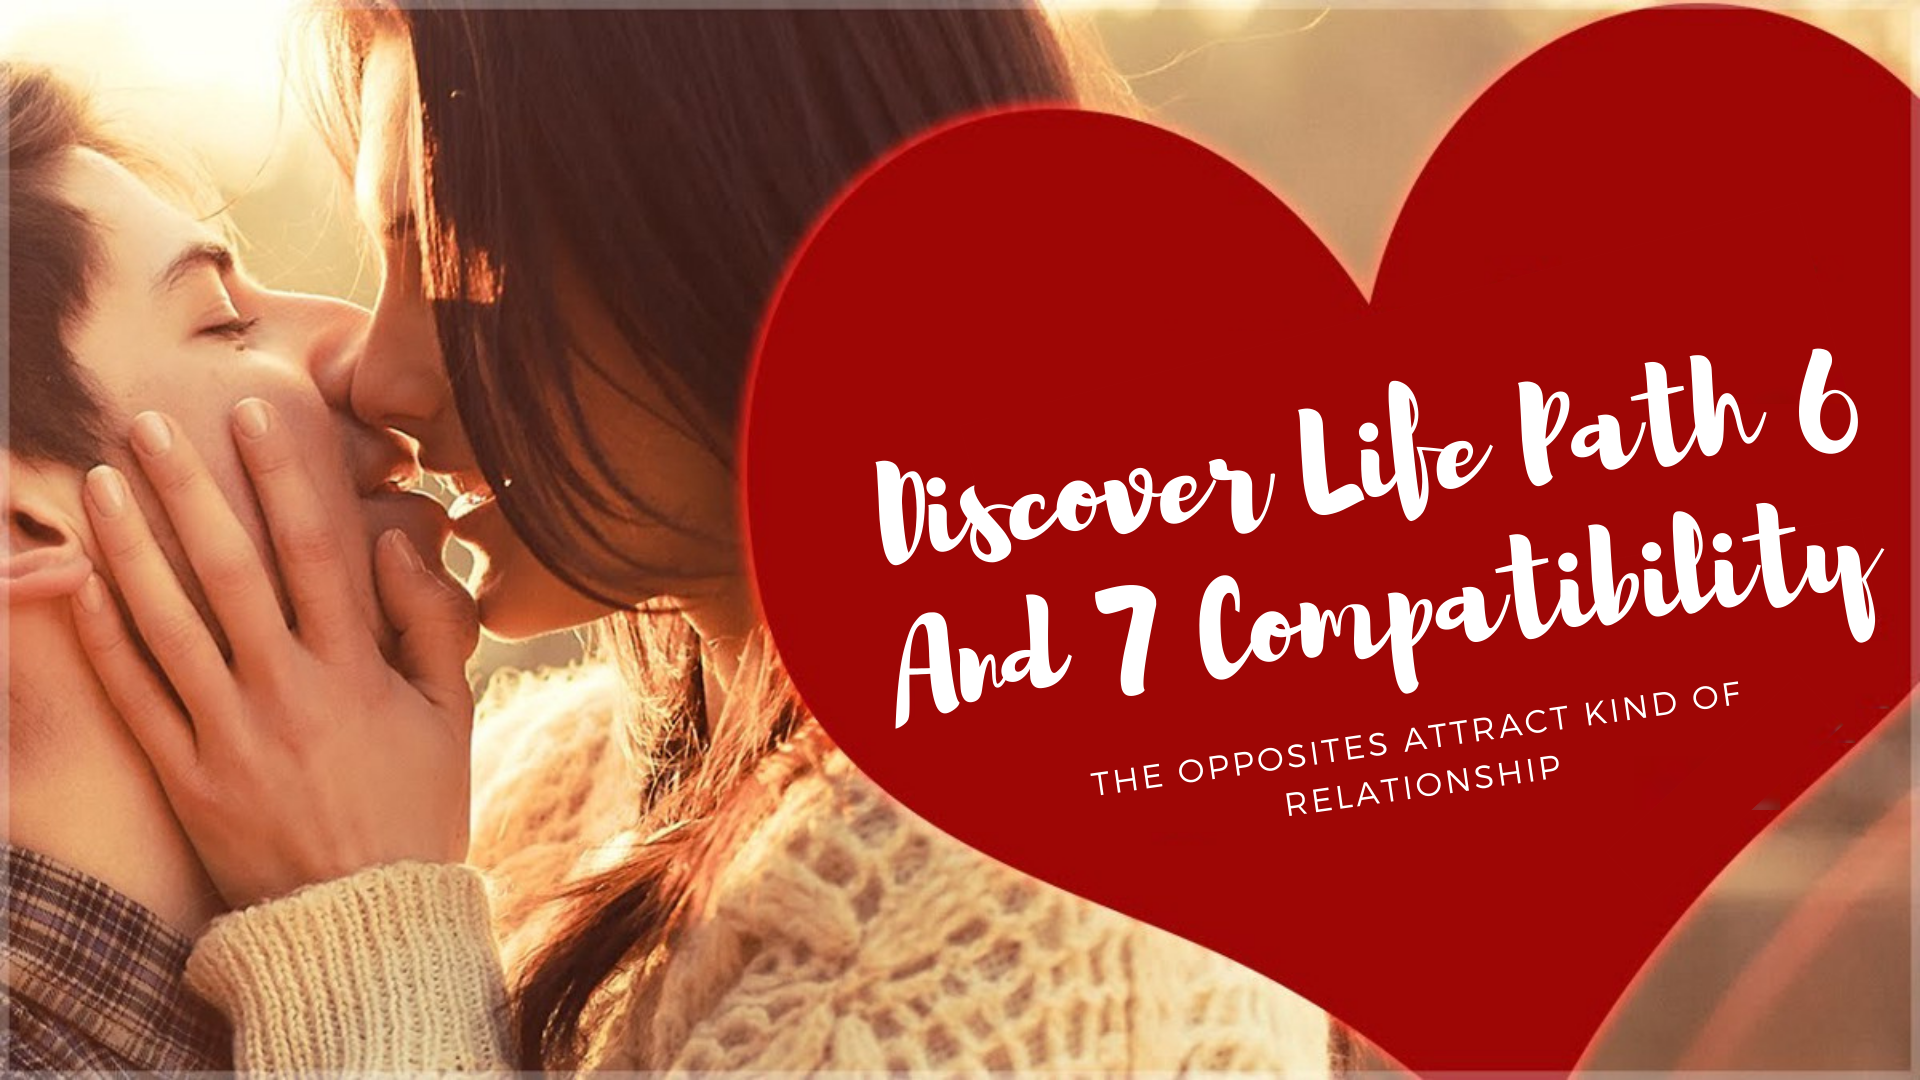 Discover Life Path 6 And 7 Compatibility - The Opposites Attract Kind Of Relationship